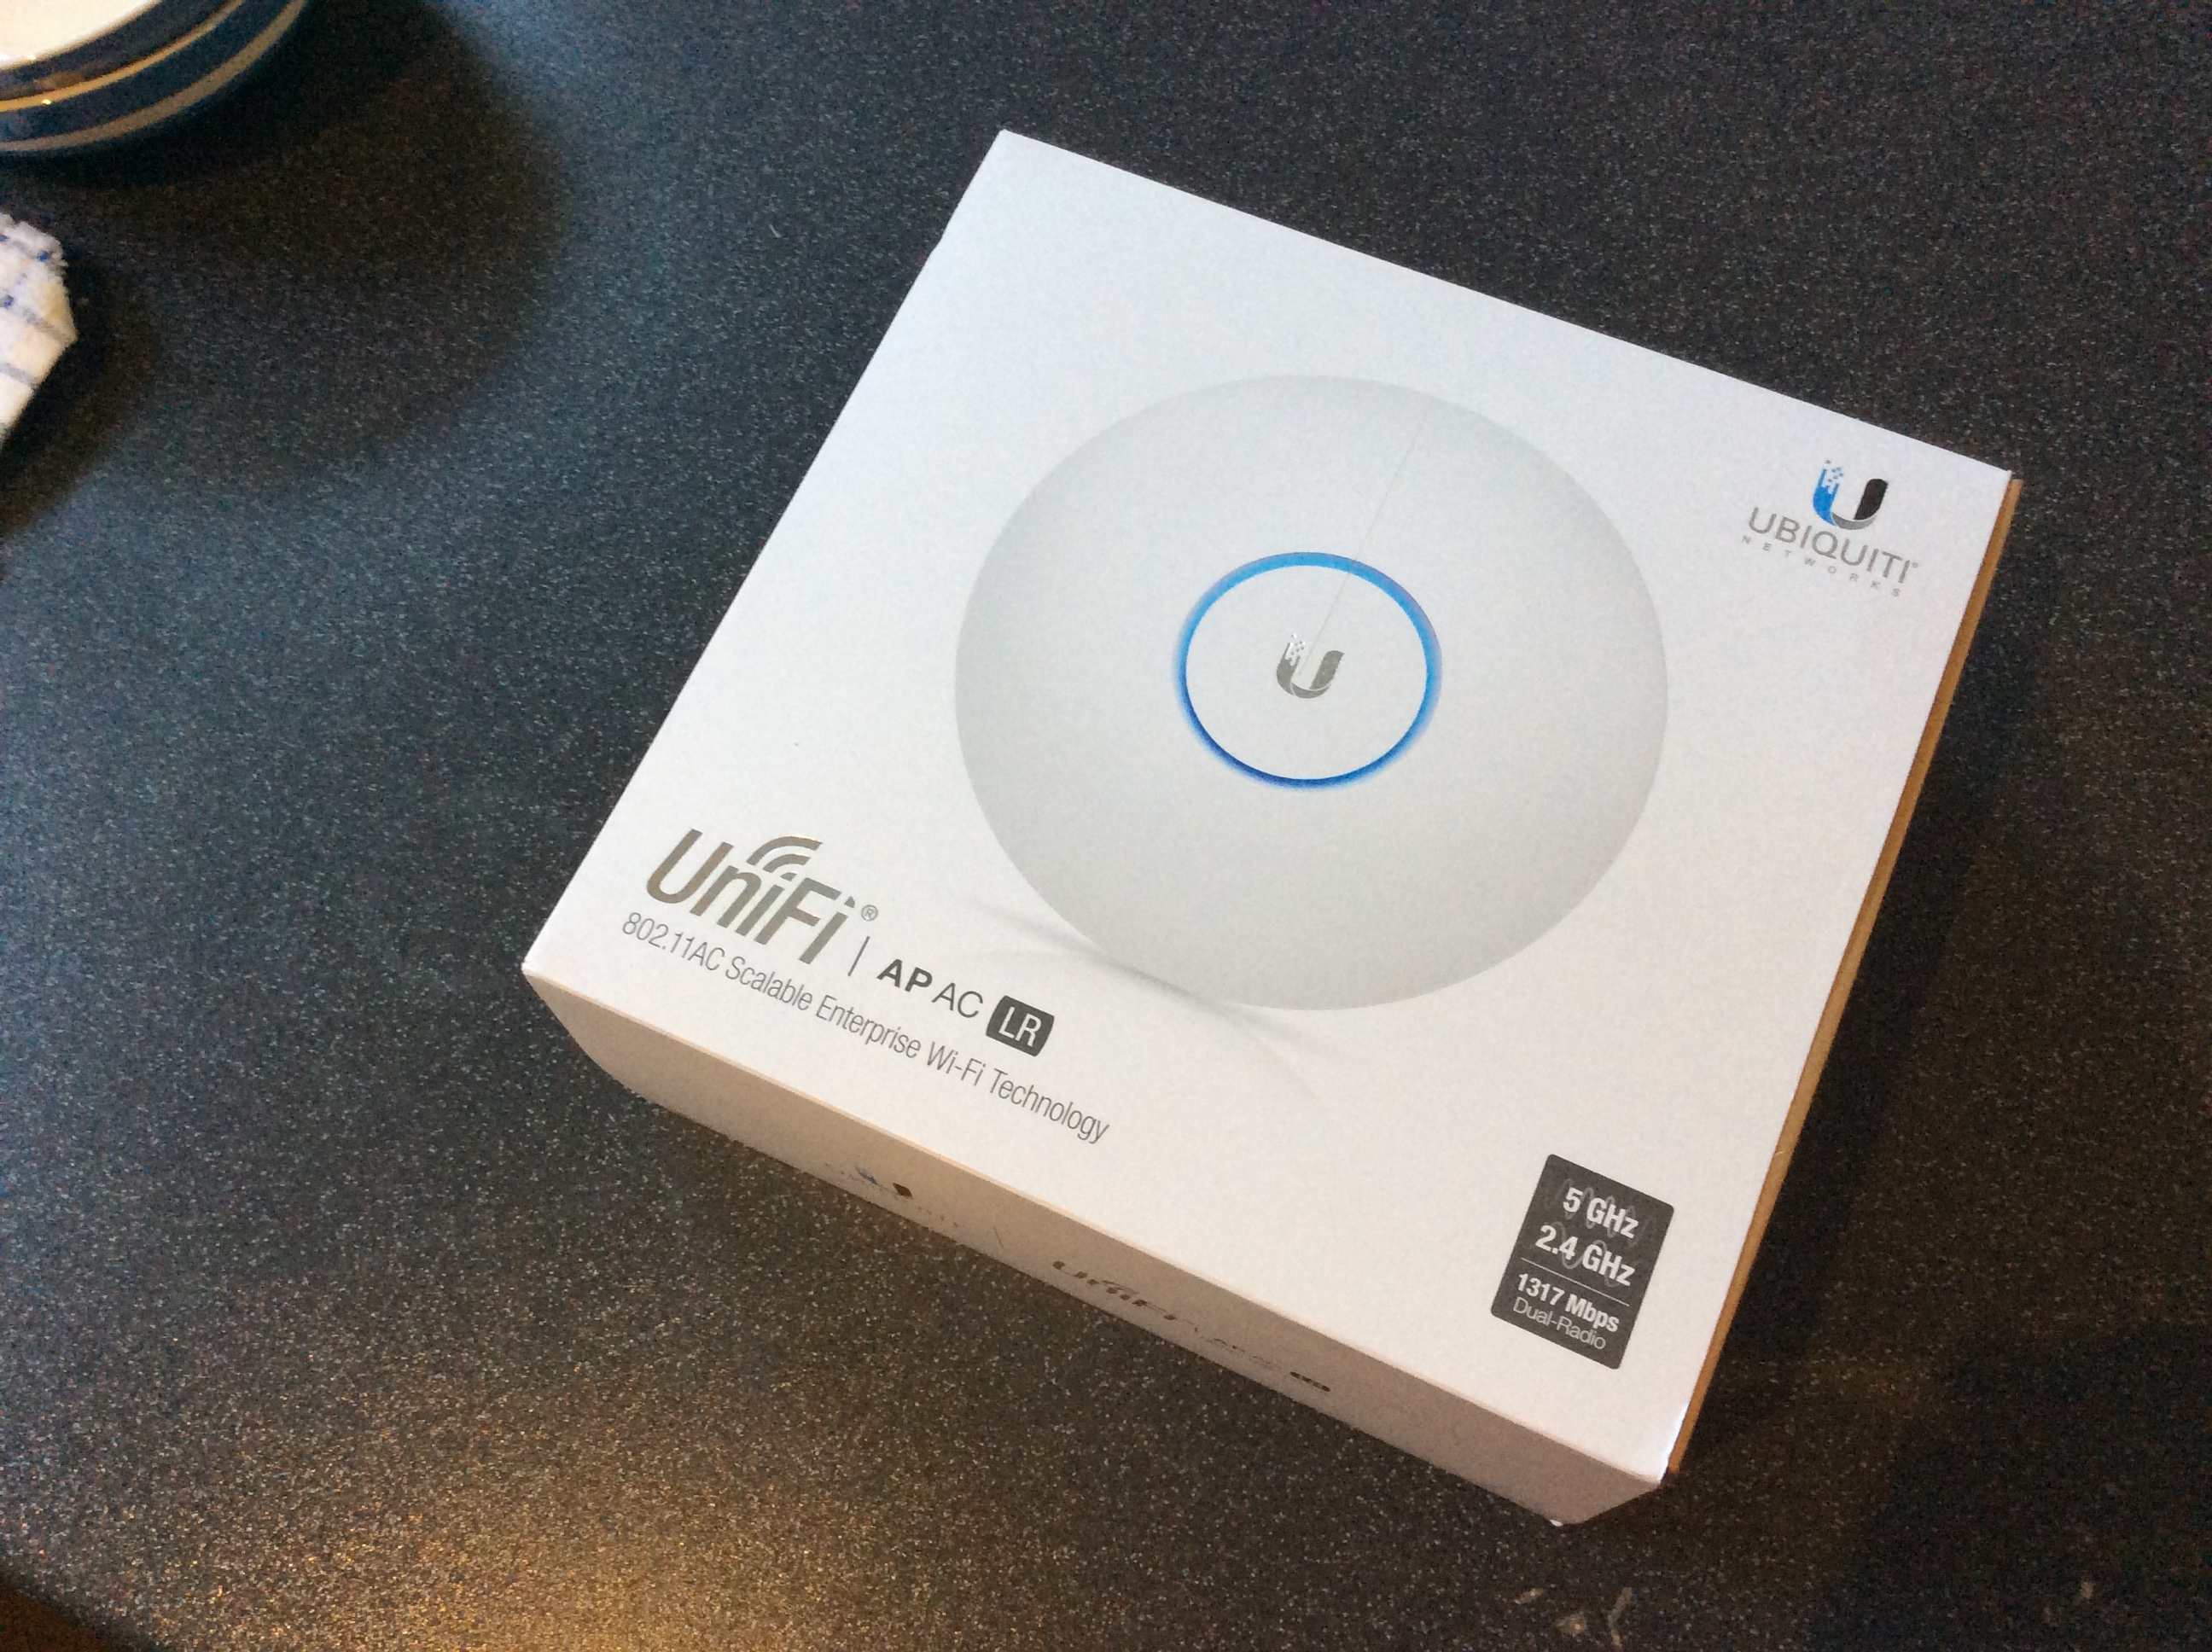 brutalt skive Ny ankomst My review of the Ubiquiti UAP-AC-LR - Networking - Linus Tech Tips